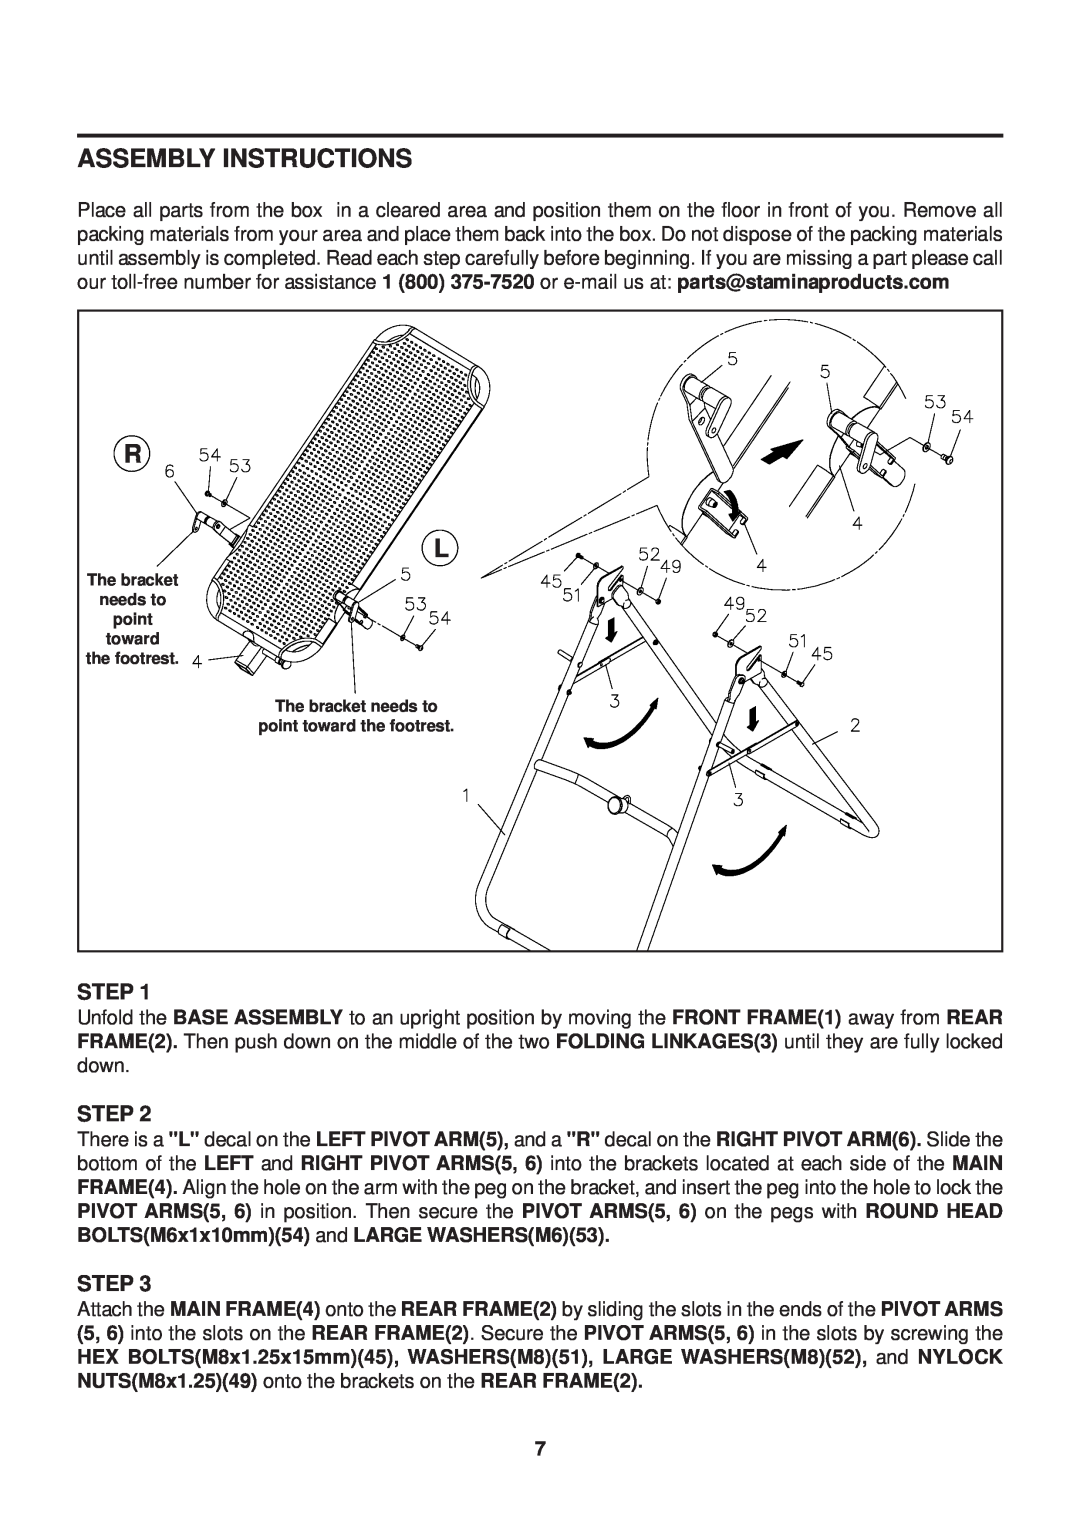 Stamina Products 55-1539A owner manual Assembly Instructions, The bracket needs to, point toward the footrest 